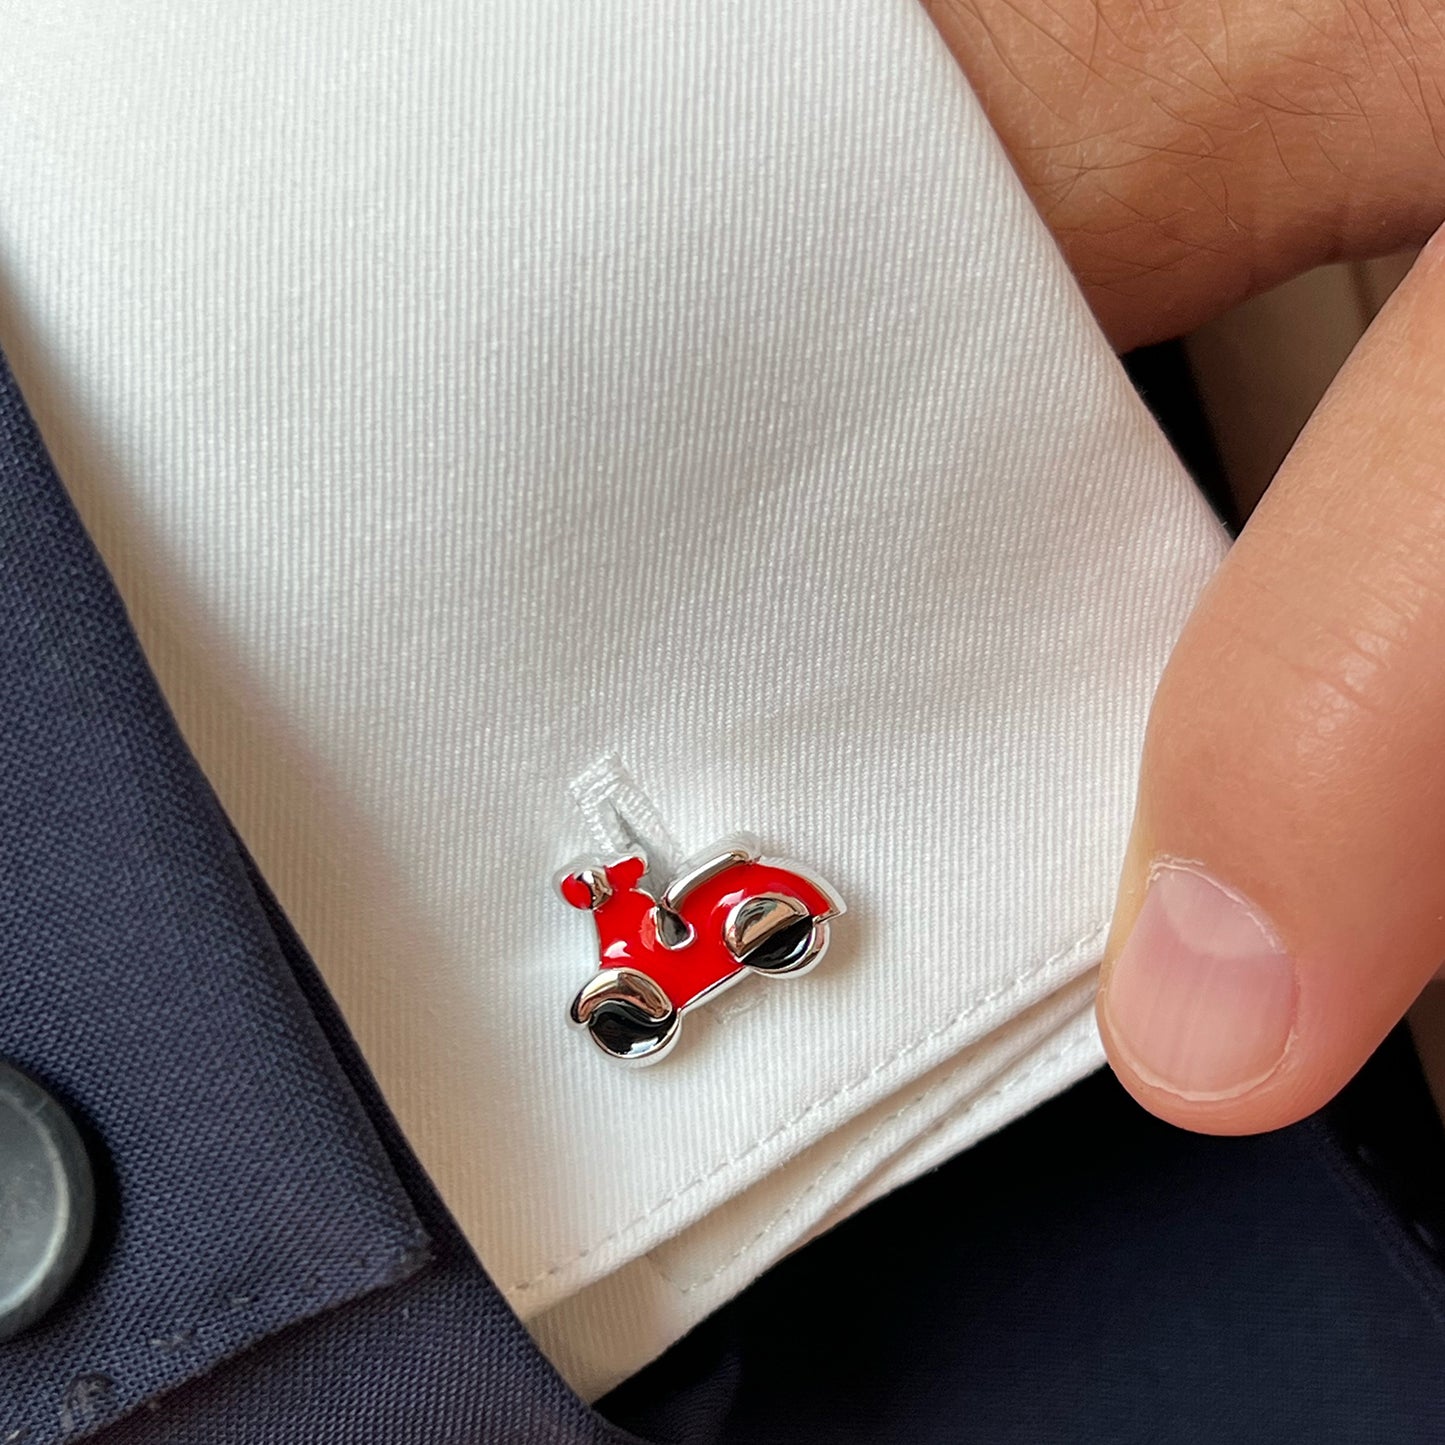 Vespa style scooter cufflinks in silver and red enamel